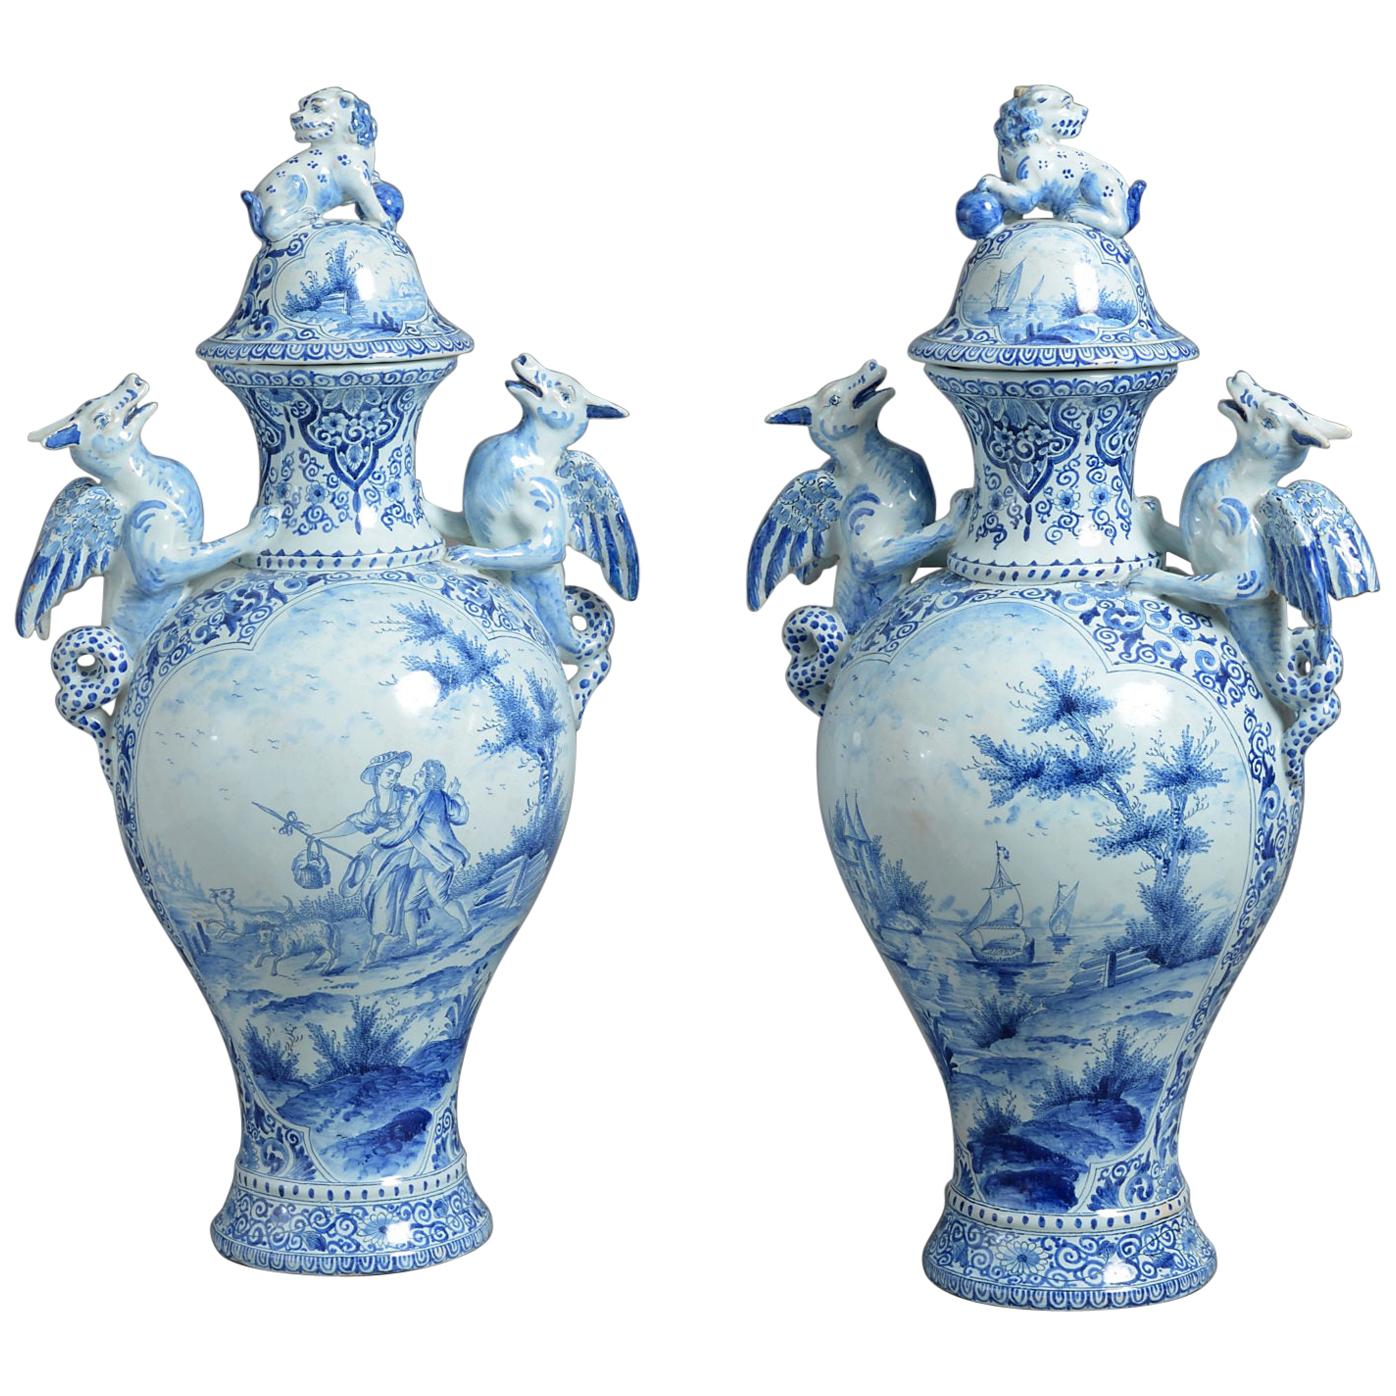 Large Pair of Blue & White Delft Pottery Vases and Covers